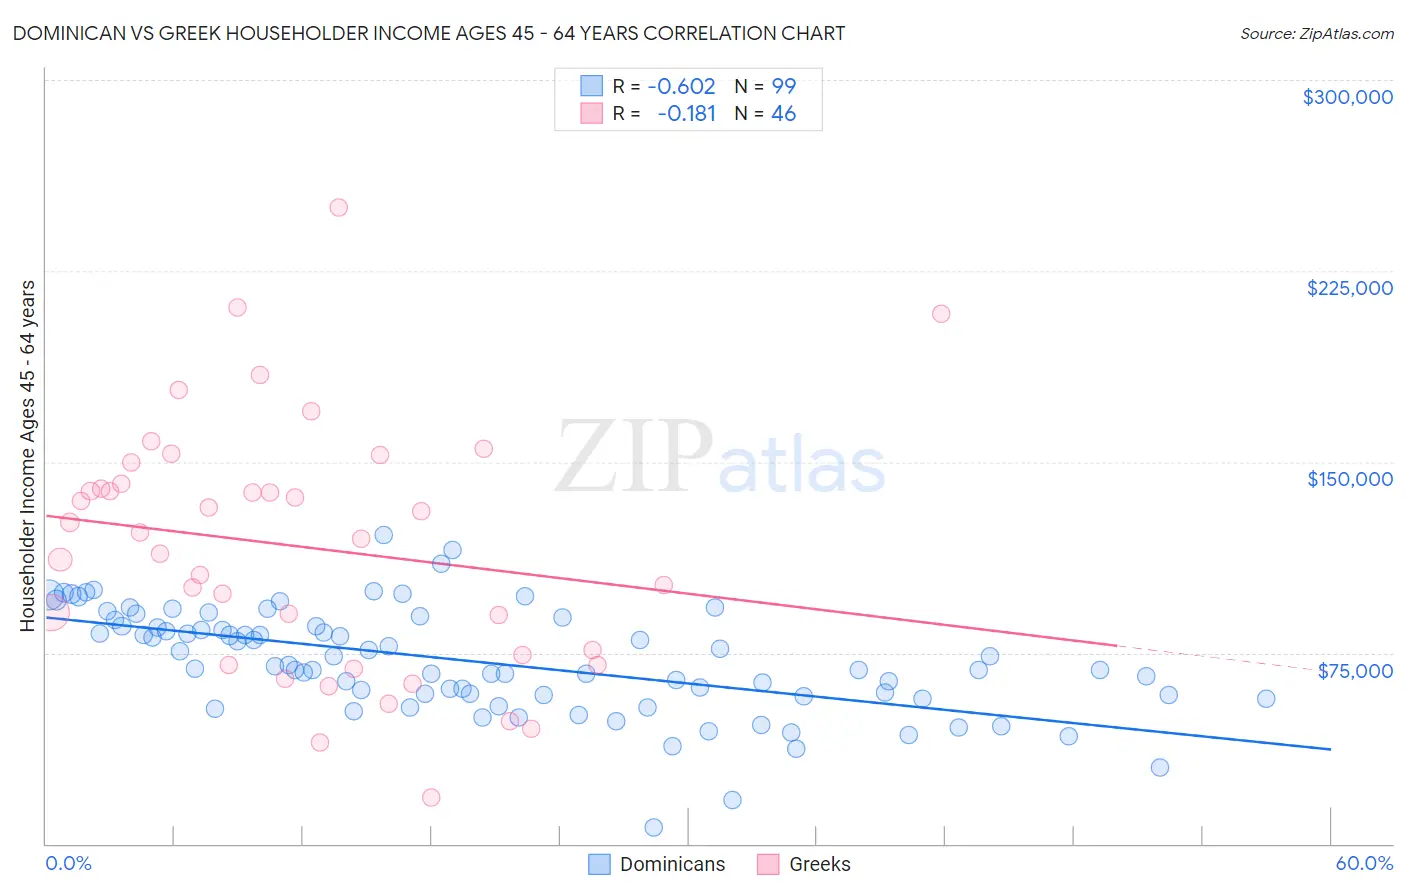 Dominican vs Greek Householder Income Ages 45 - 64 years